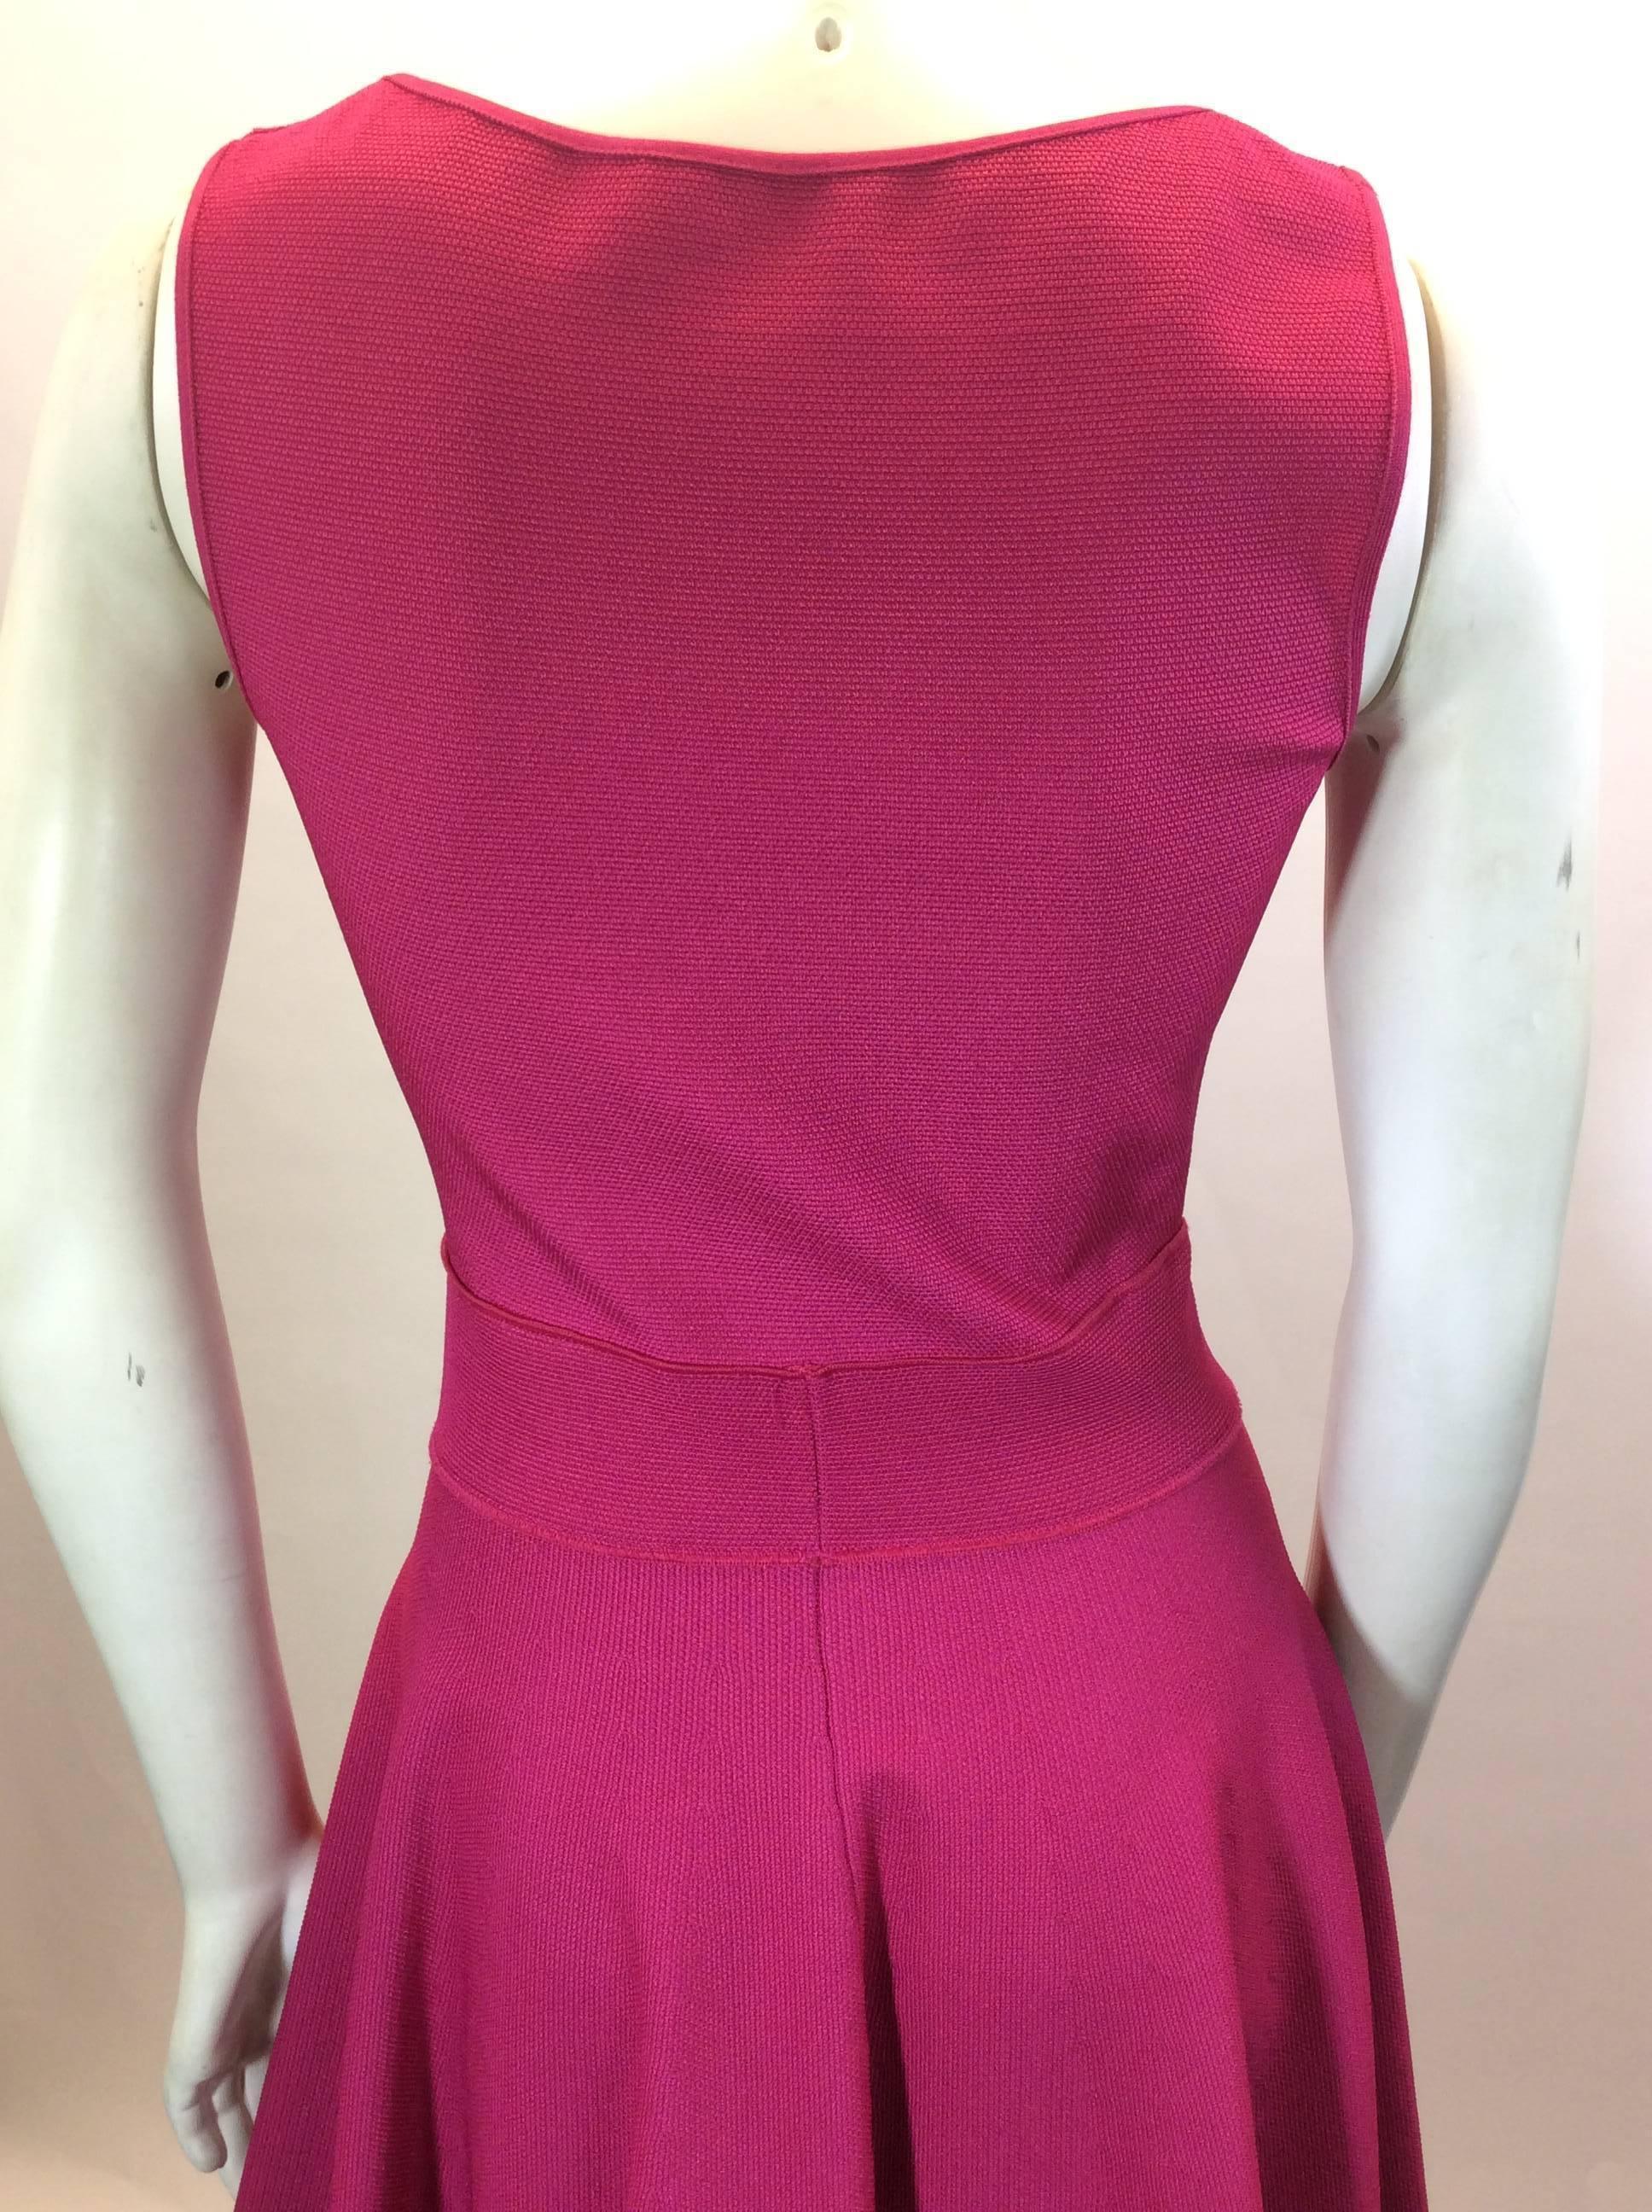 Lanvin Fuscia Knit Fit and Flare Dress In Excellent Condition For Sale In Narberth, PA